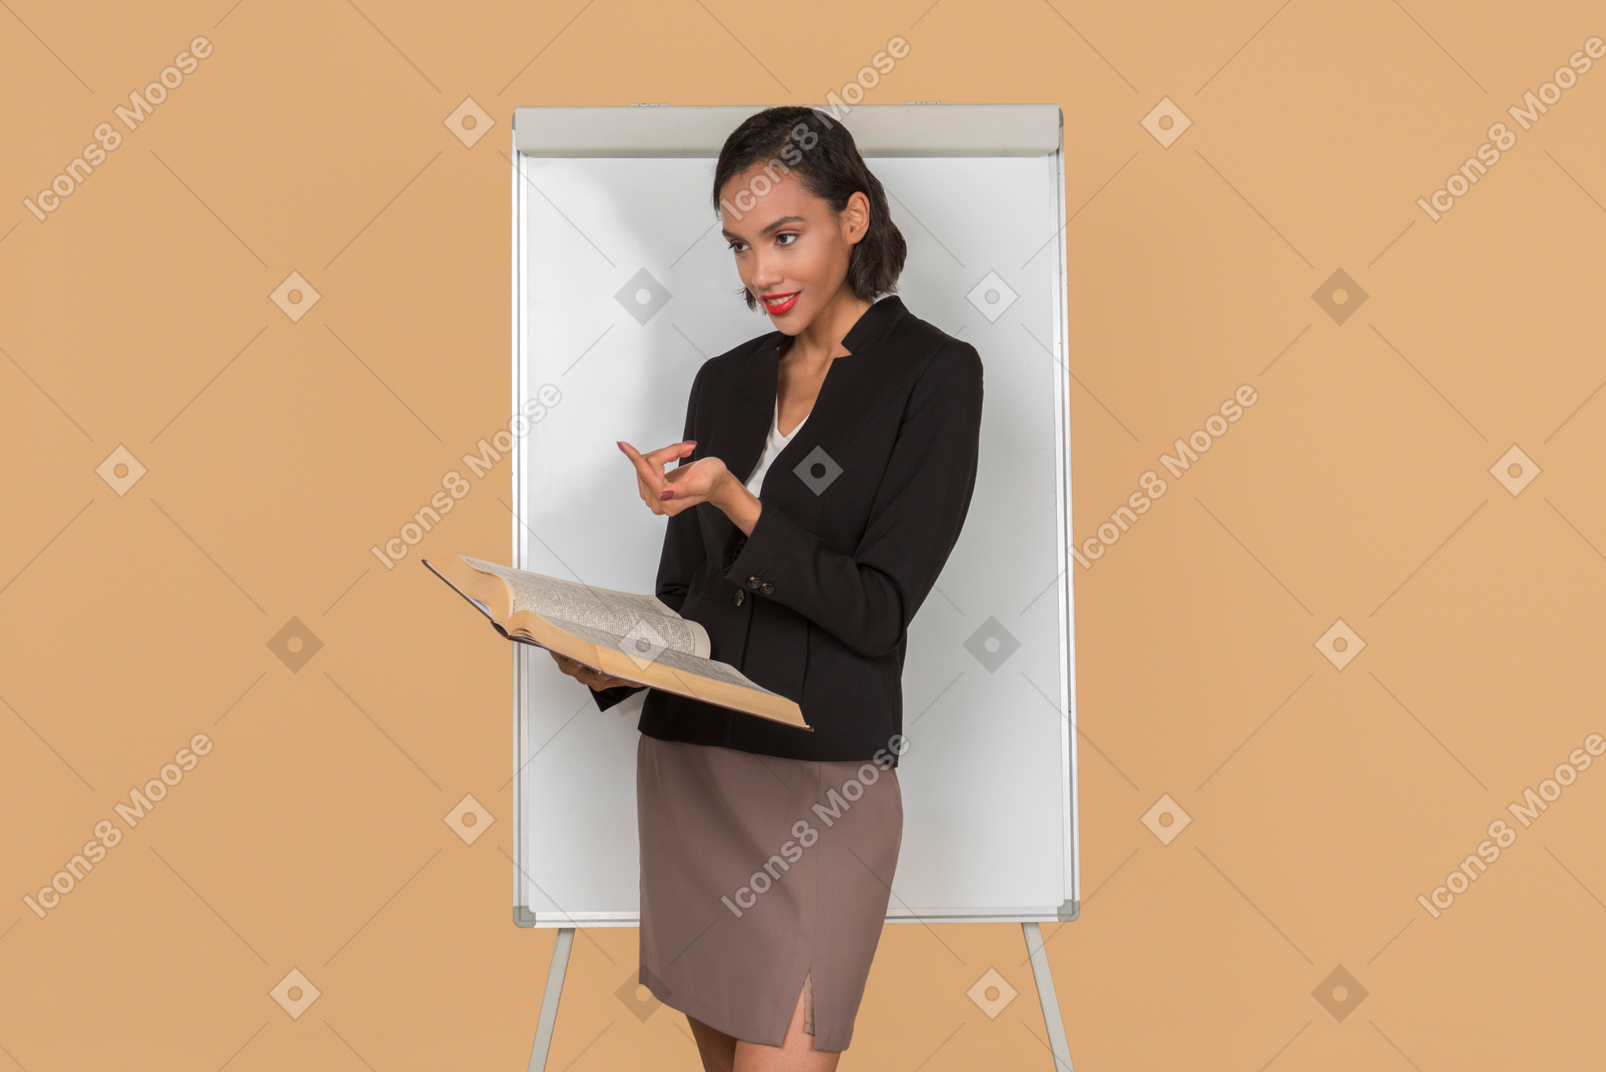 Attractive afro woman standing by the whiteboarding